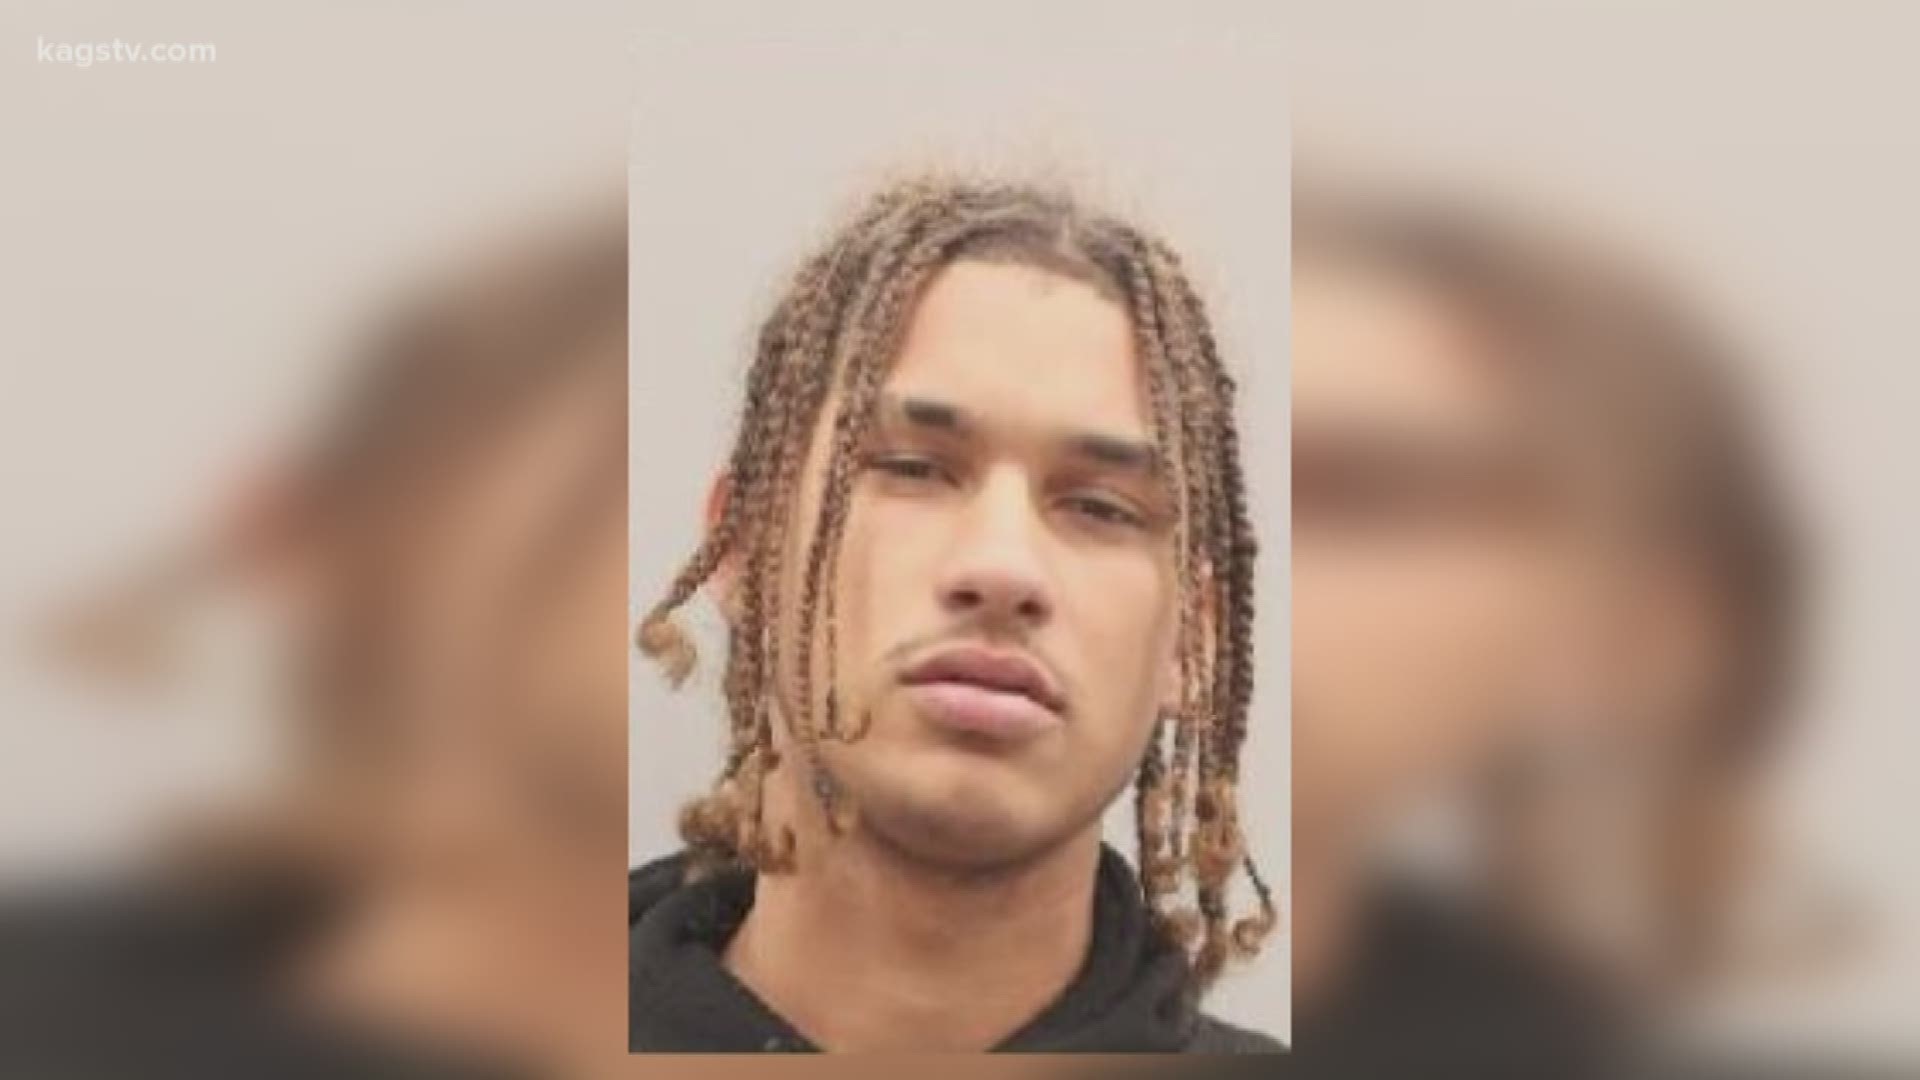 The 19 year old has been in Harris County Jail since Monday for a different charge.